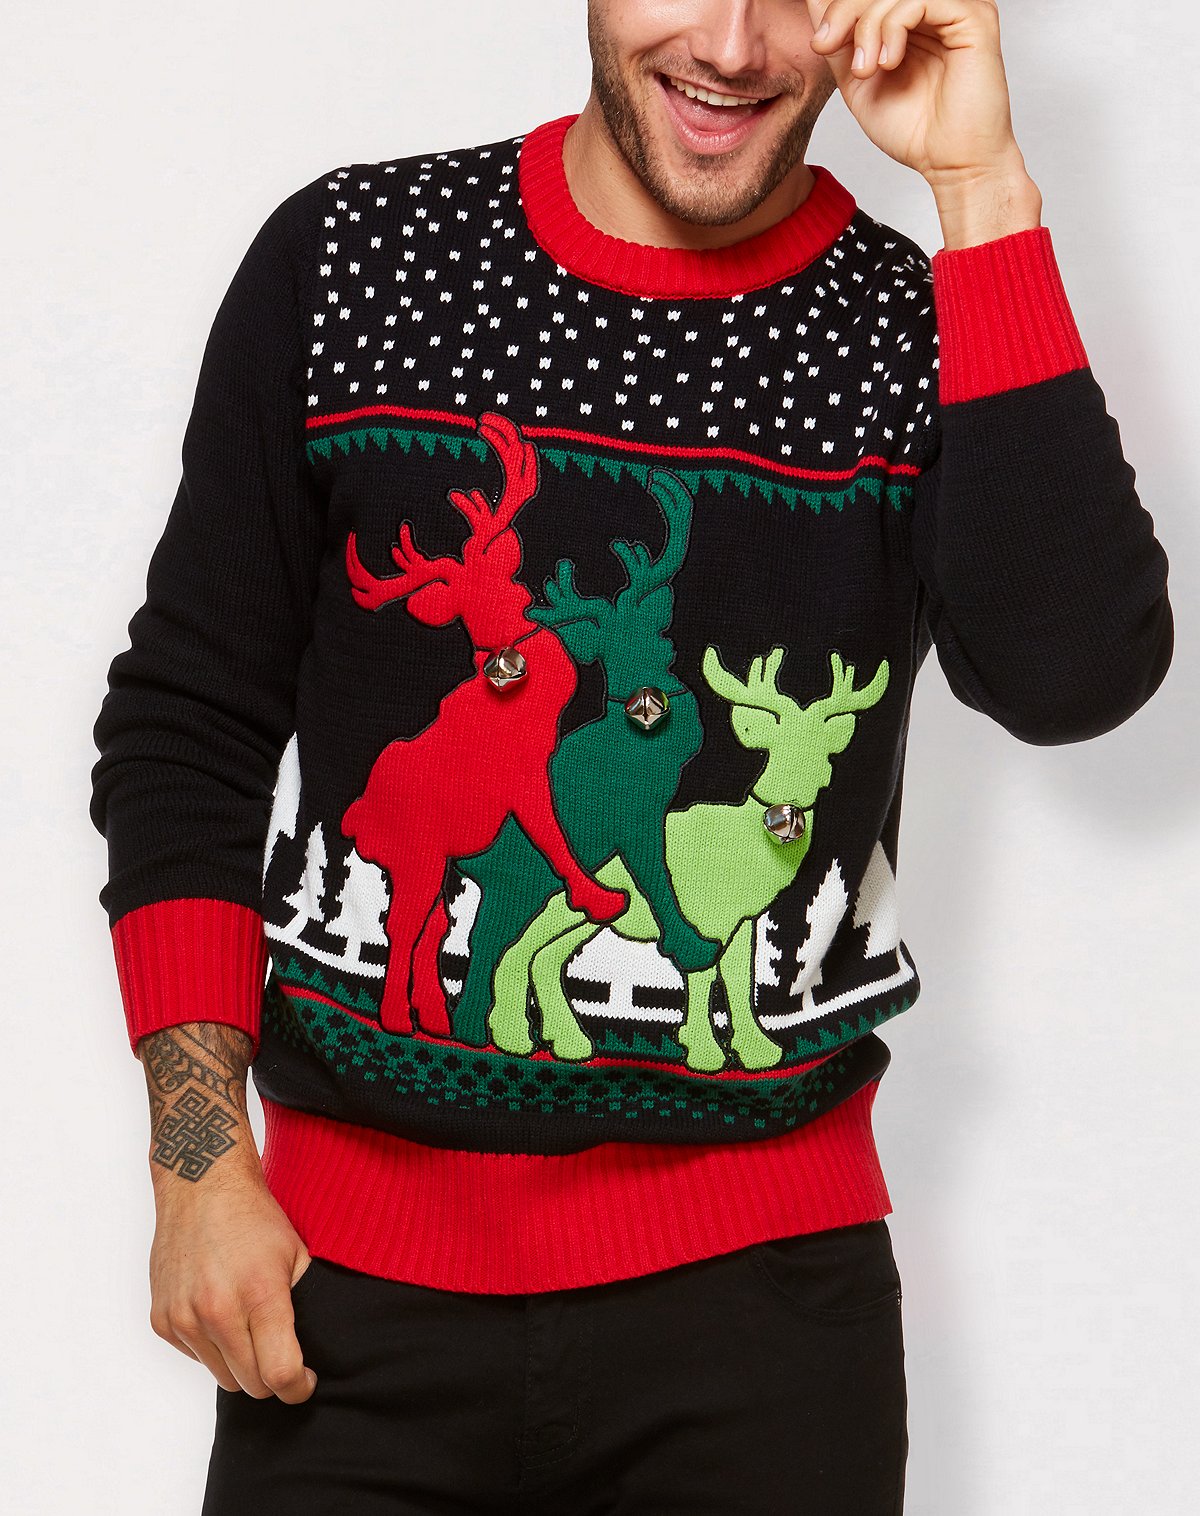 Top 10 Funny Ugly Christmas Sweaters of 2018 – Spencers Party Blog